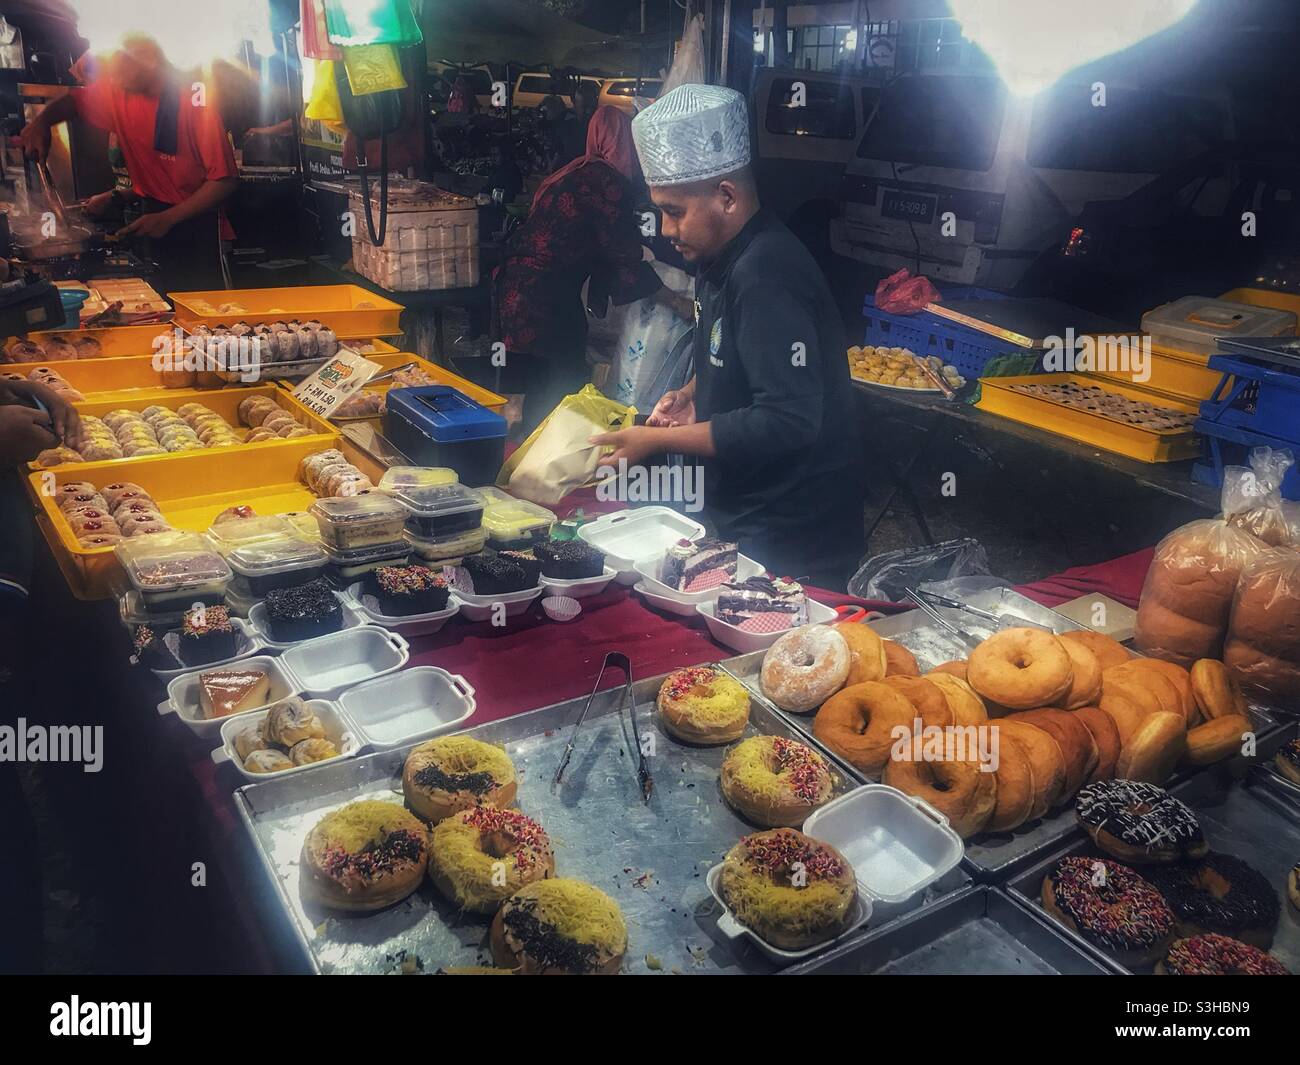 Donuts and baked goods for sale at the Temonyang Nigh Market near Pantai Cenang on the island of Langkawi, Malaysia Stock Photo